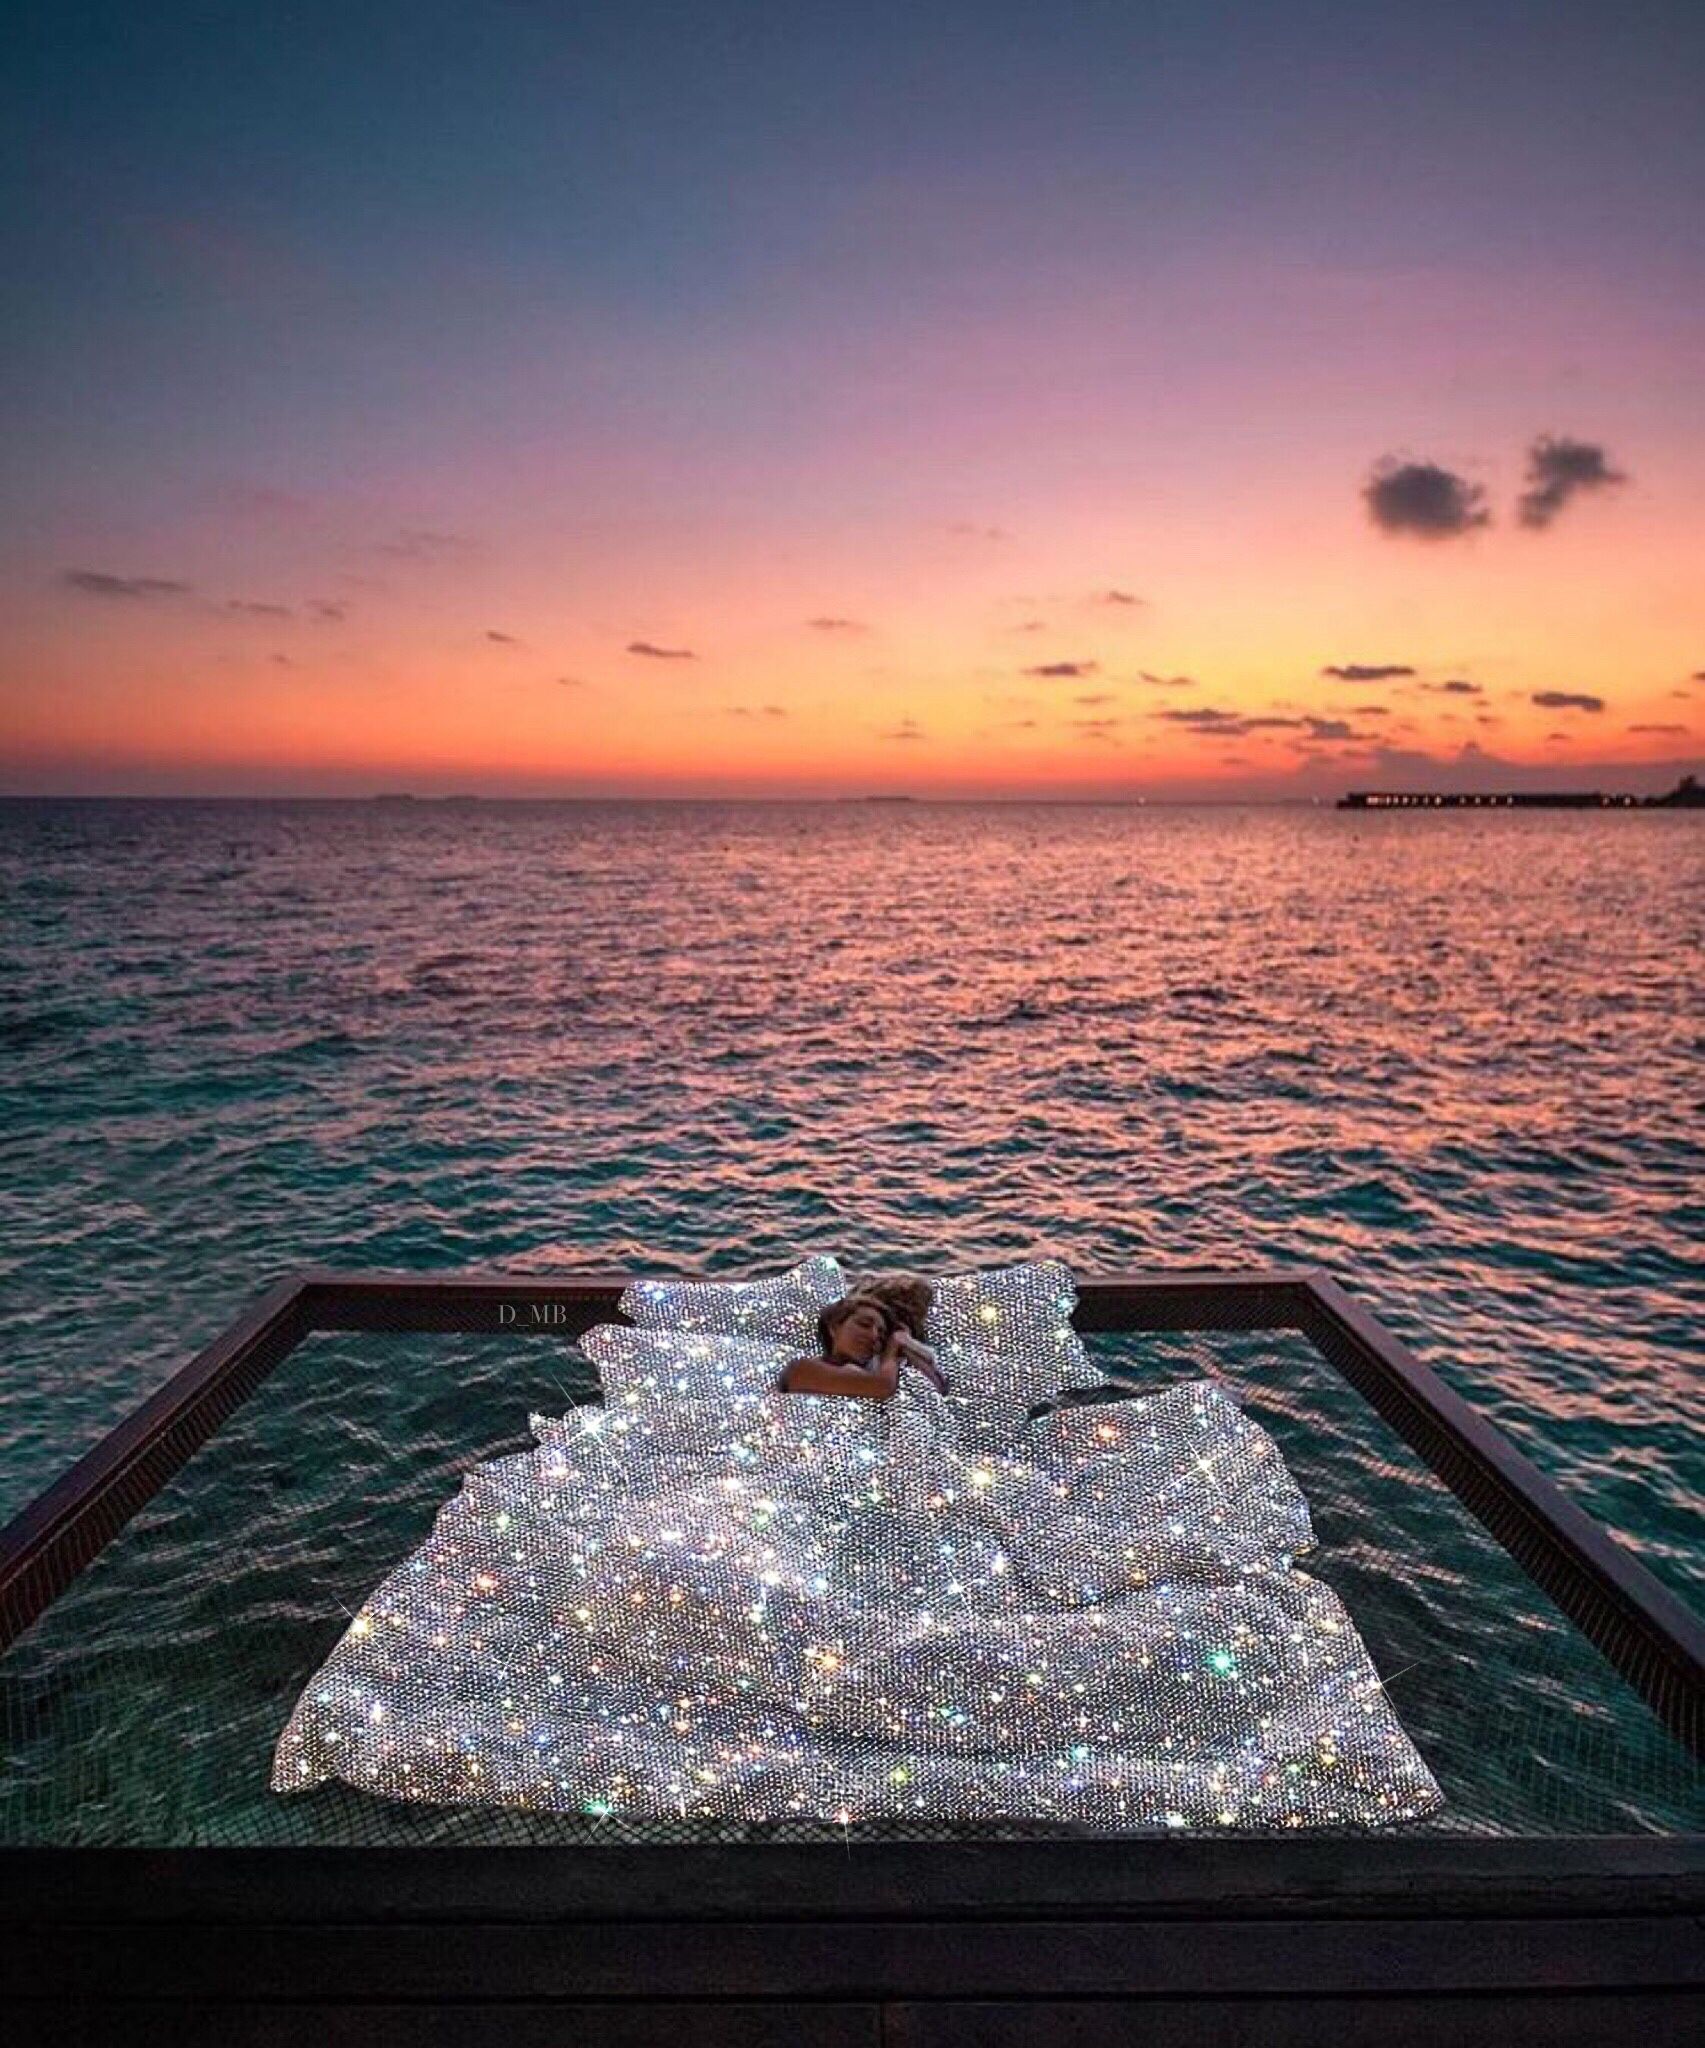 A woman lying on a giant inflatable bed in the middle of the ocean - Bling, glitter